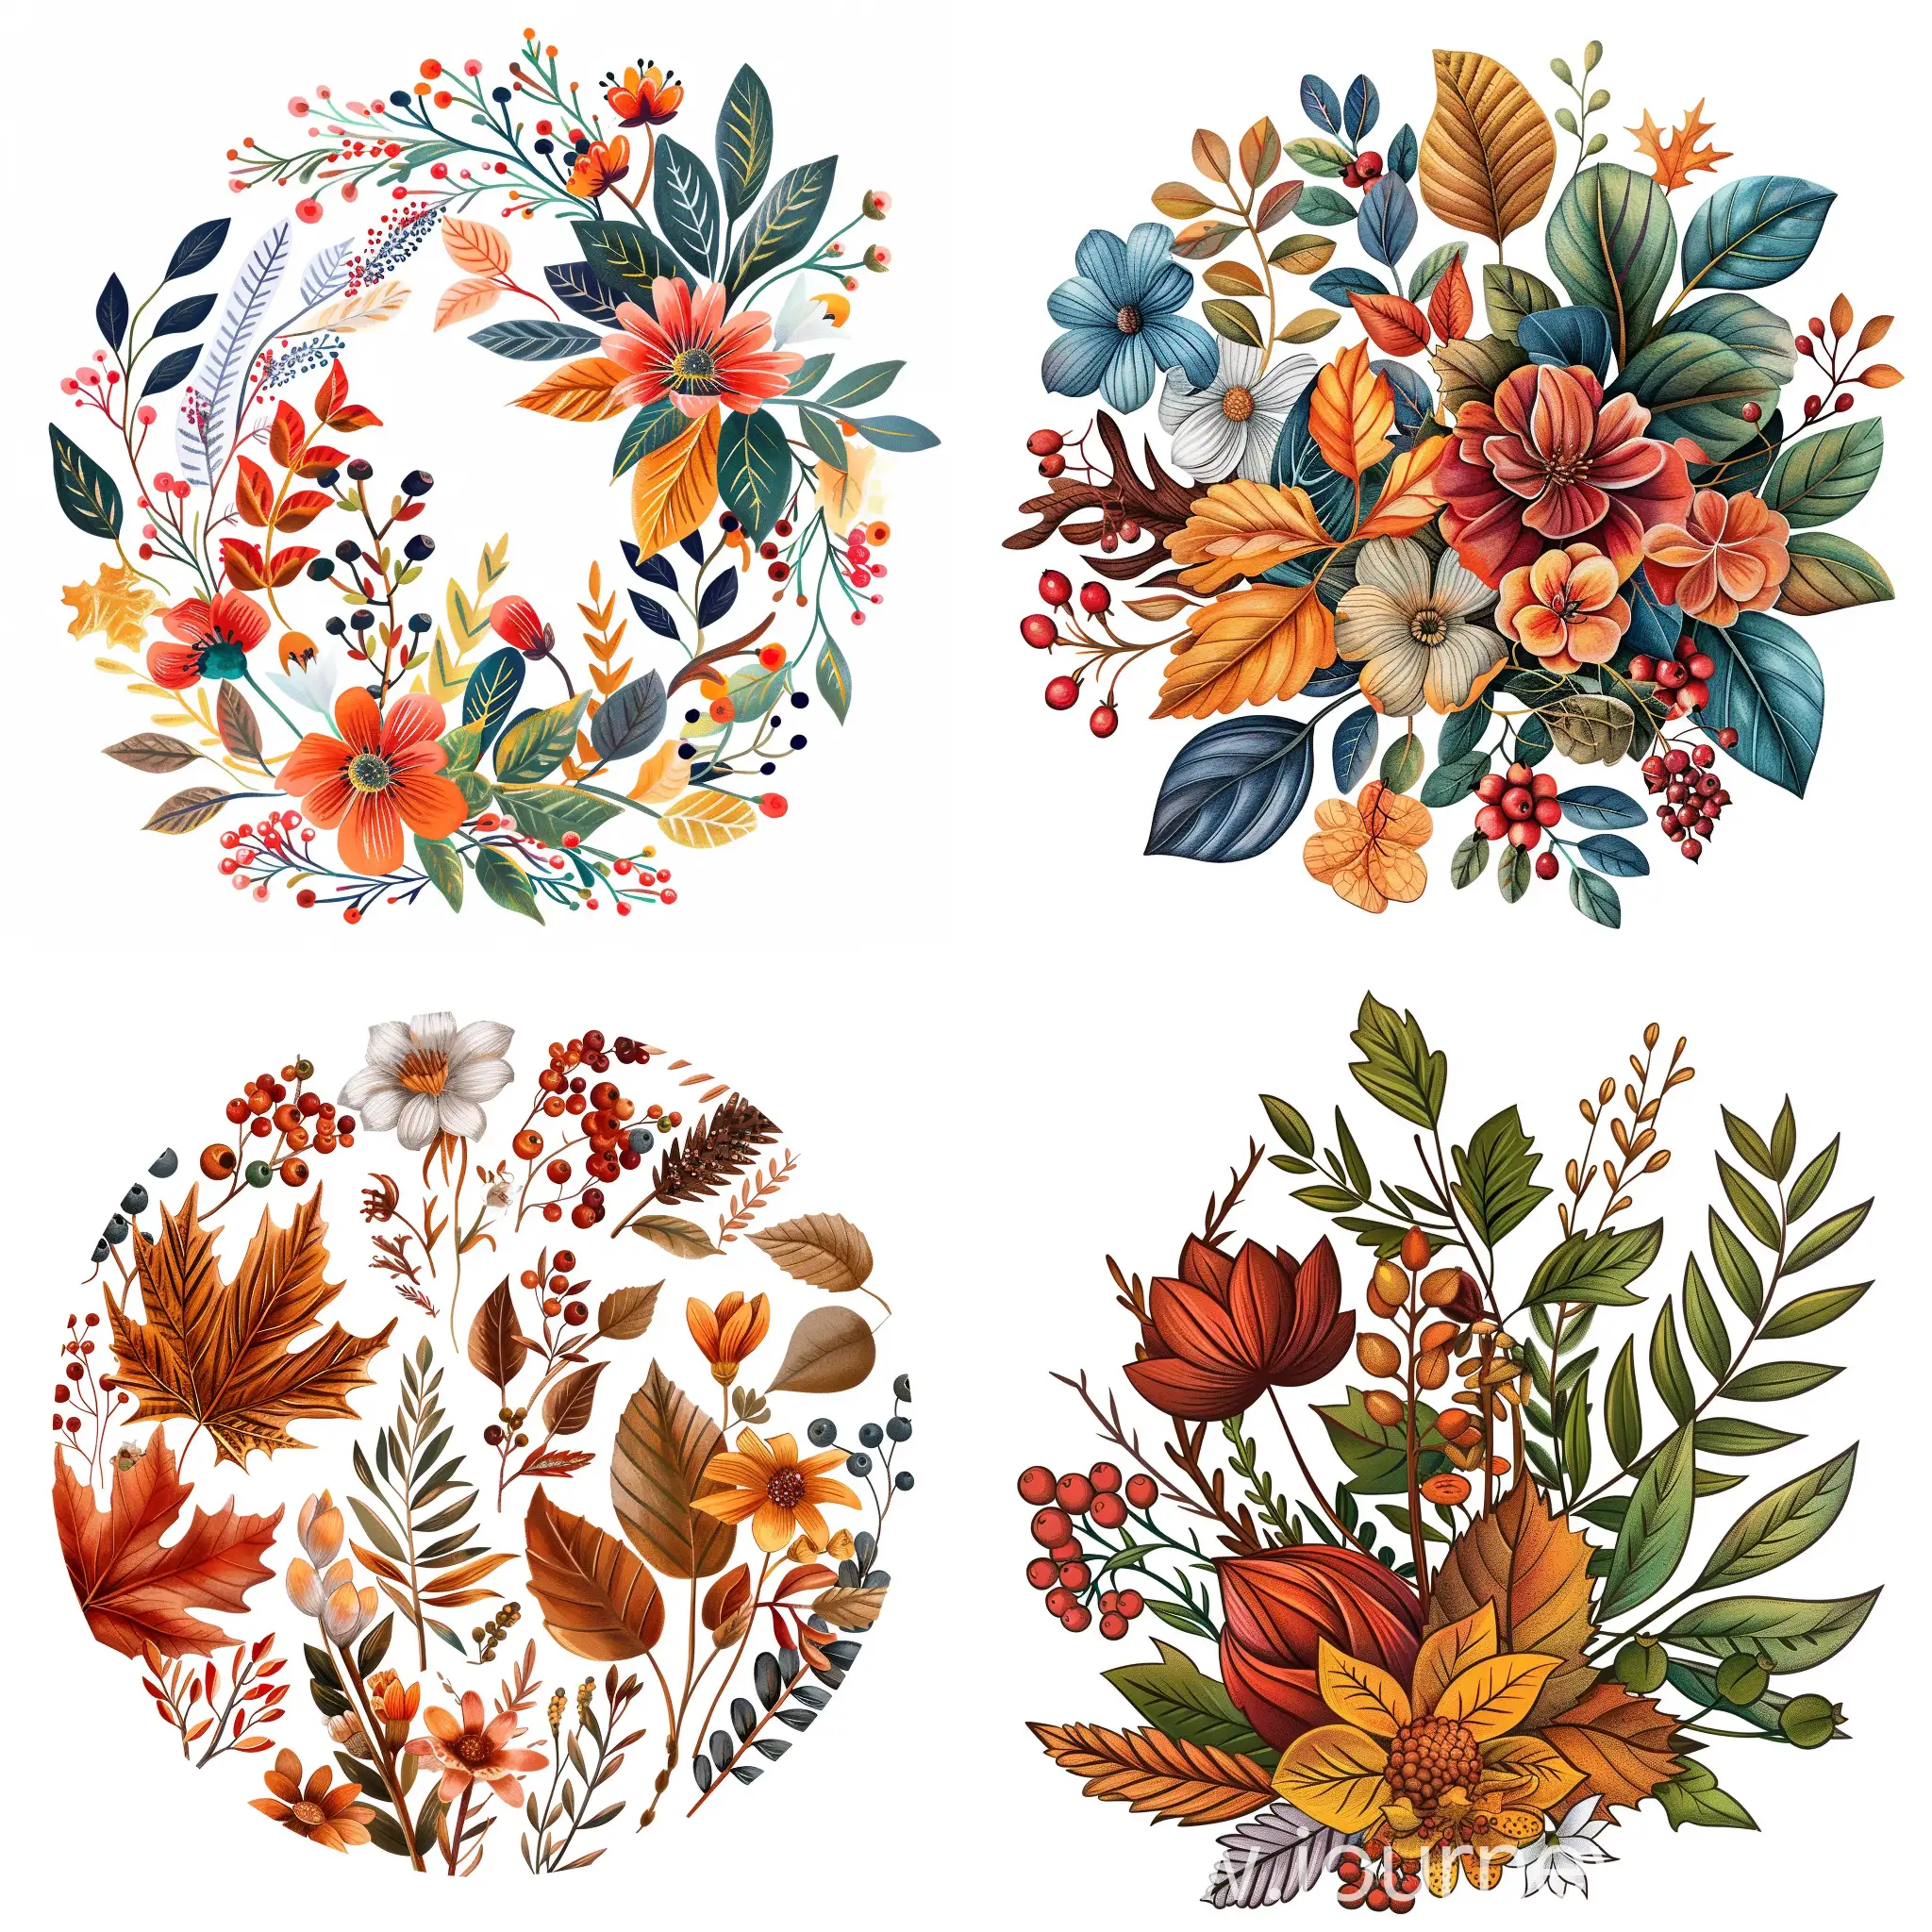 Autumnal-Round-Ornament-with-Leaves-Flowers-and-Berries-on-White-Background